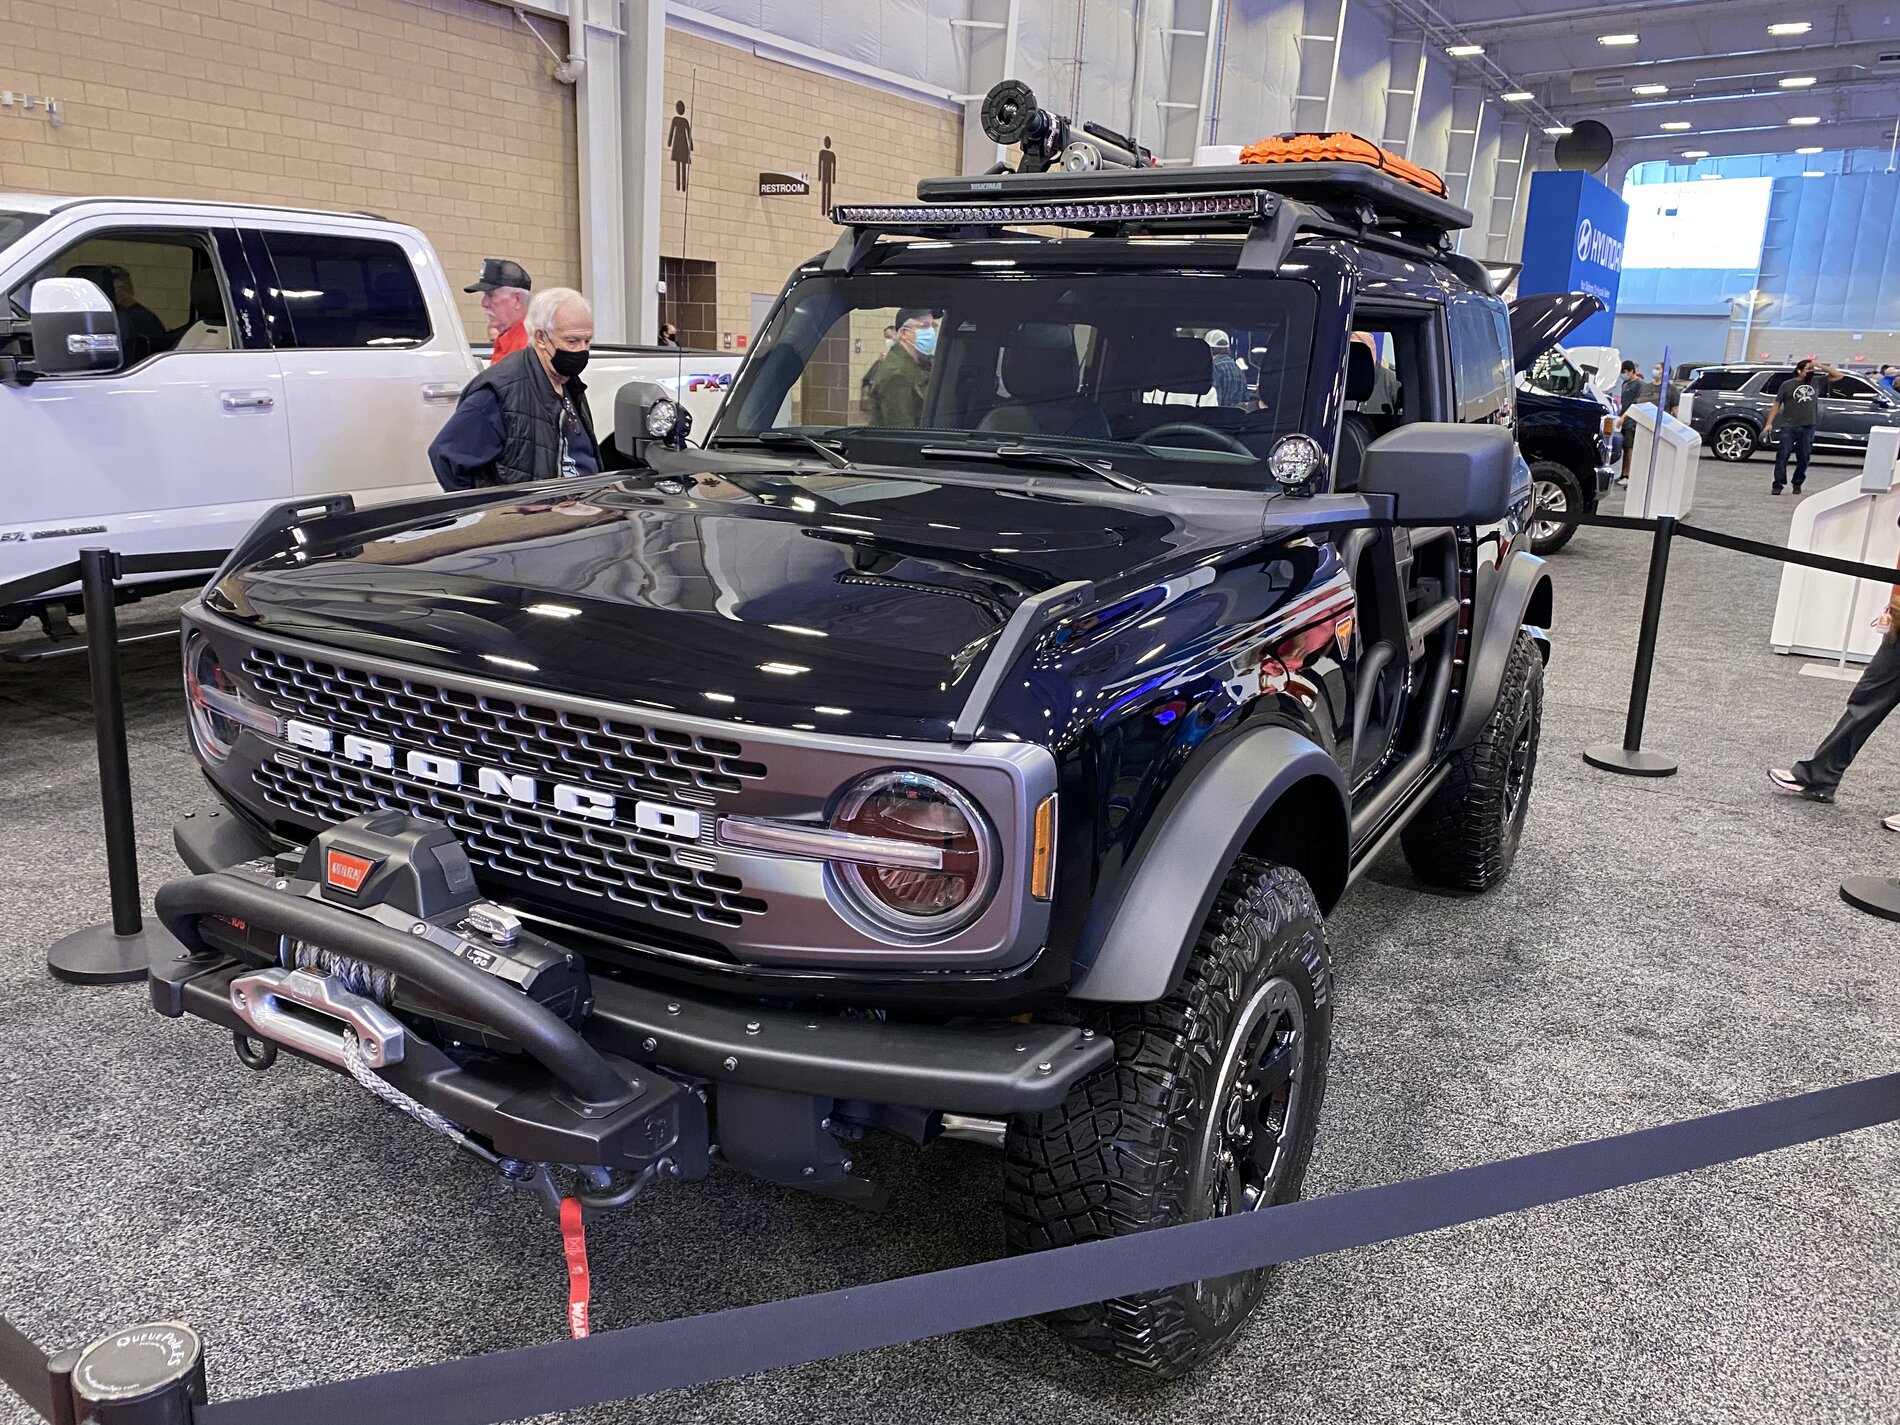 Ford Bronco Pics & Videos From OKC Show: 2-Door Trail Concept and Overland Concept Broncos 6D88C46A-87F2-4238-94FA-6EE5BCF3B1D1